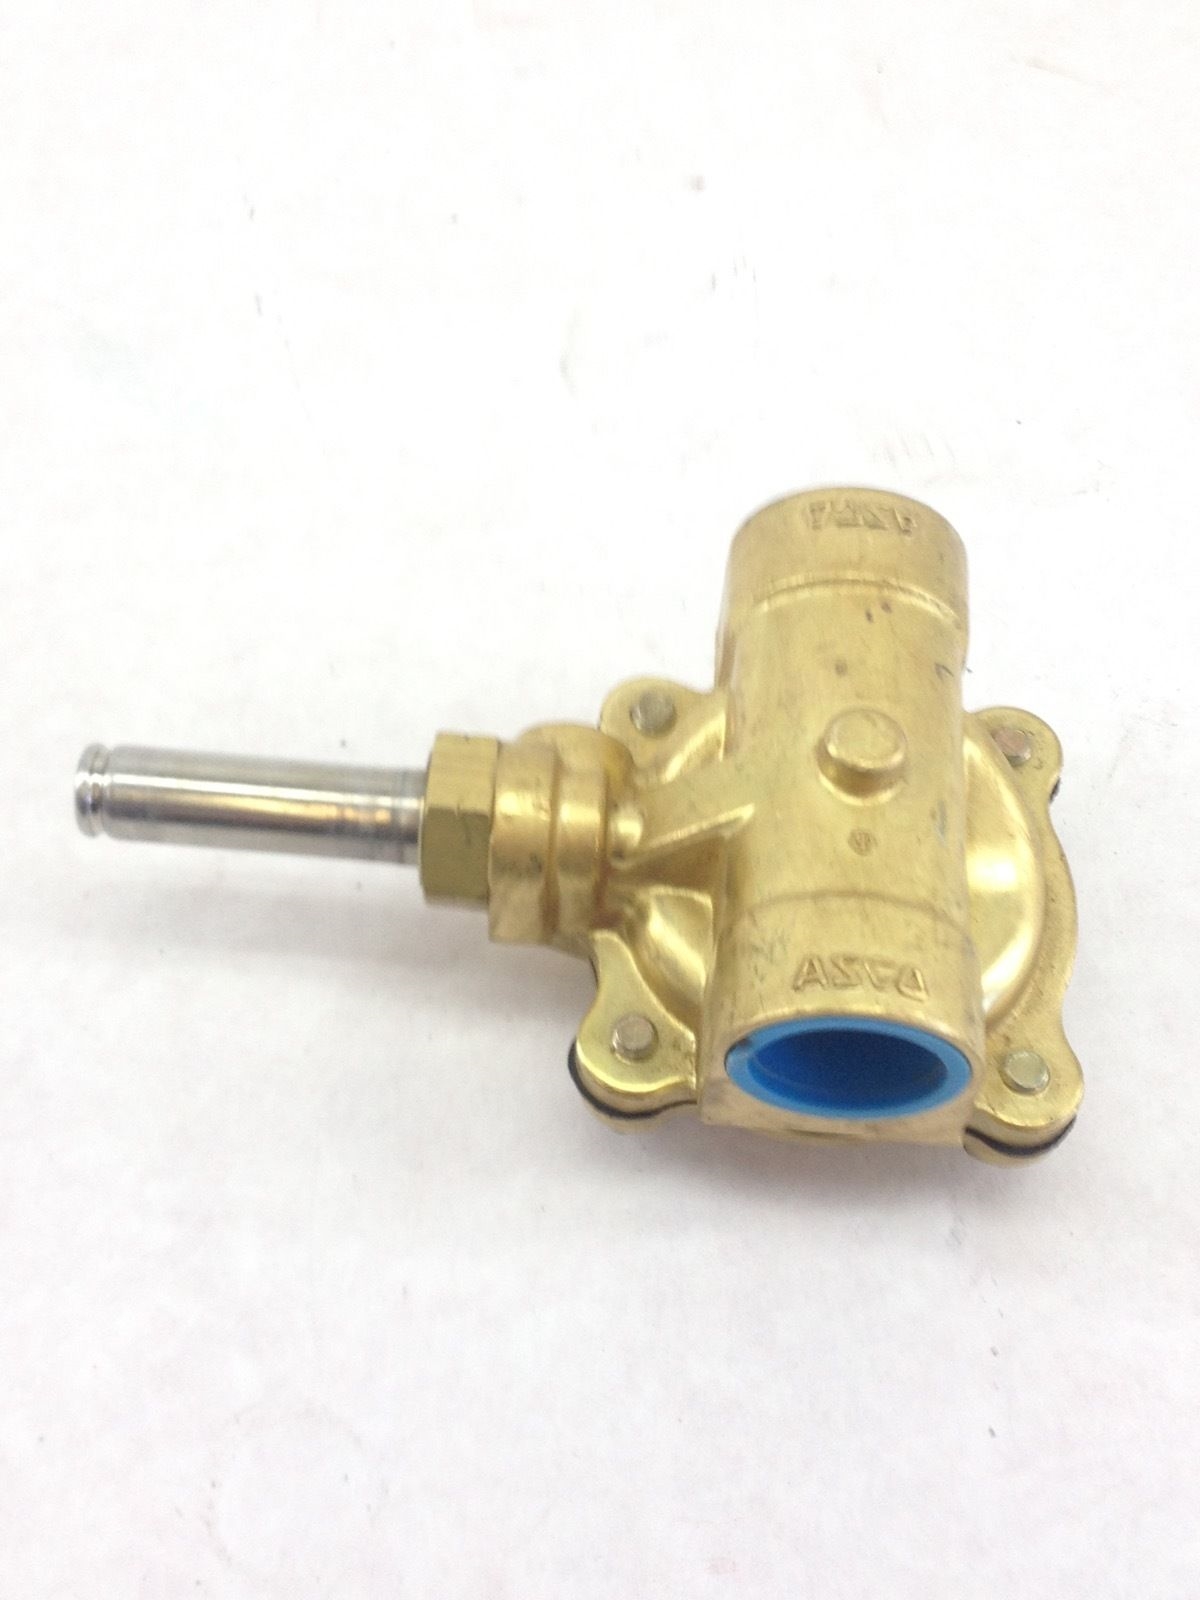 NEW! COMPLETE ASCO SOLENOID VALVE BODY LESS COIL APPEARS TO BE SC8210 3/4″ (B82) 3